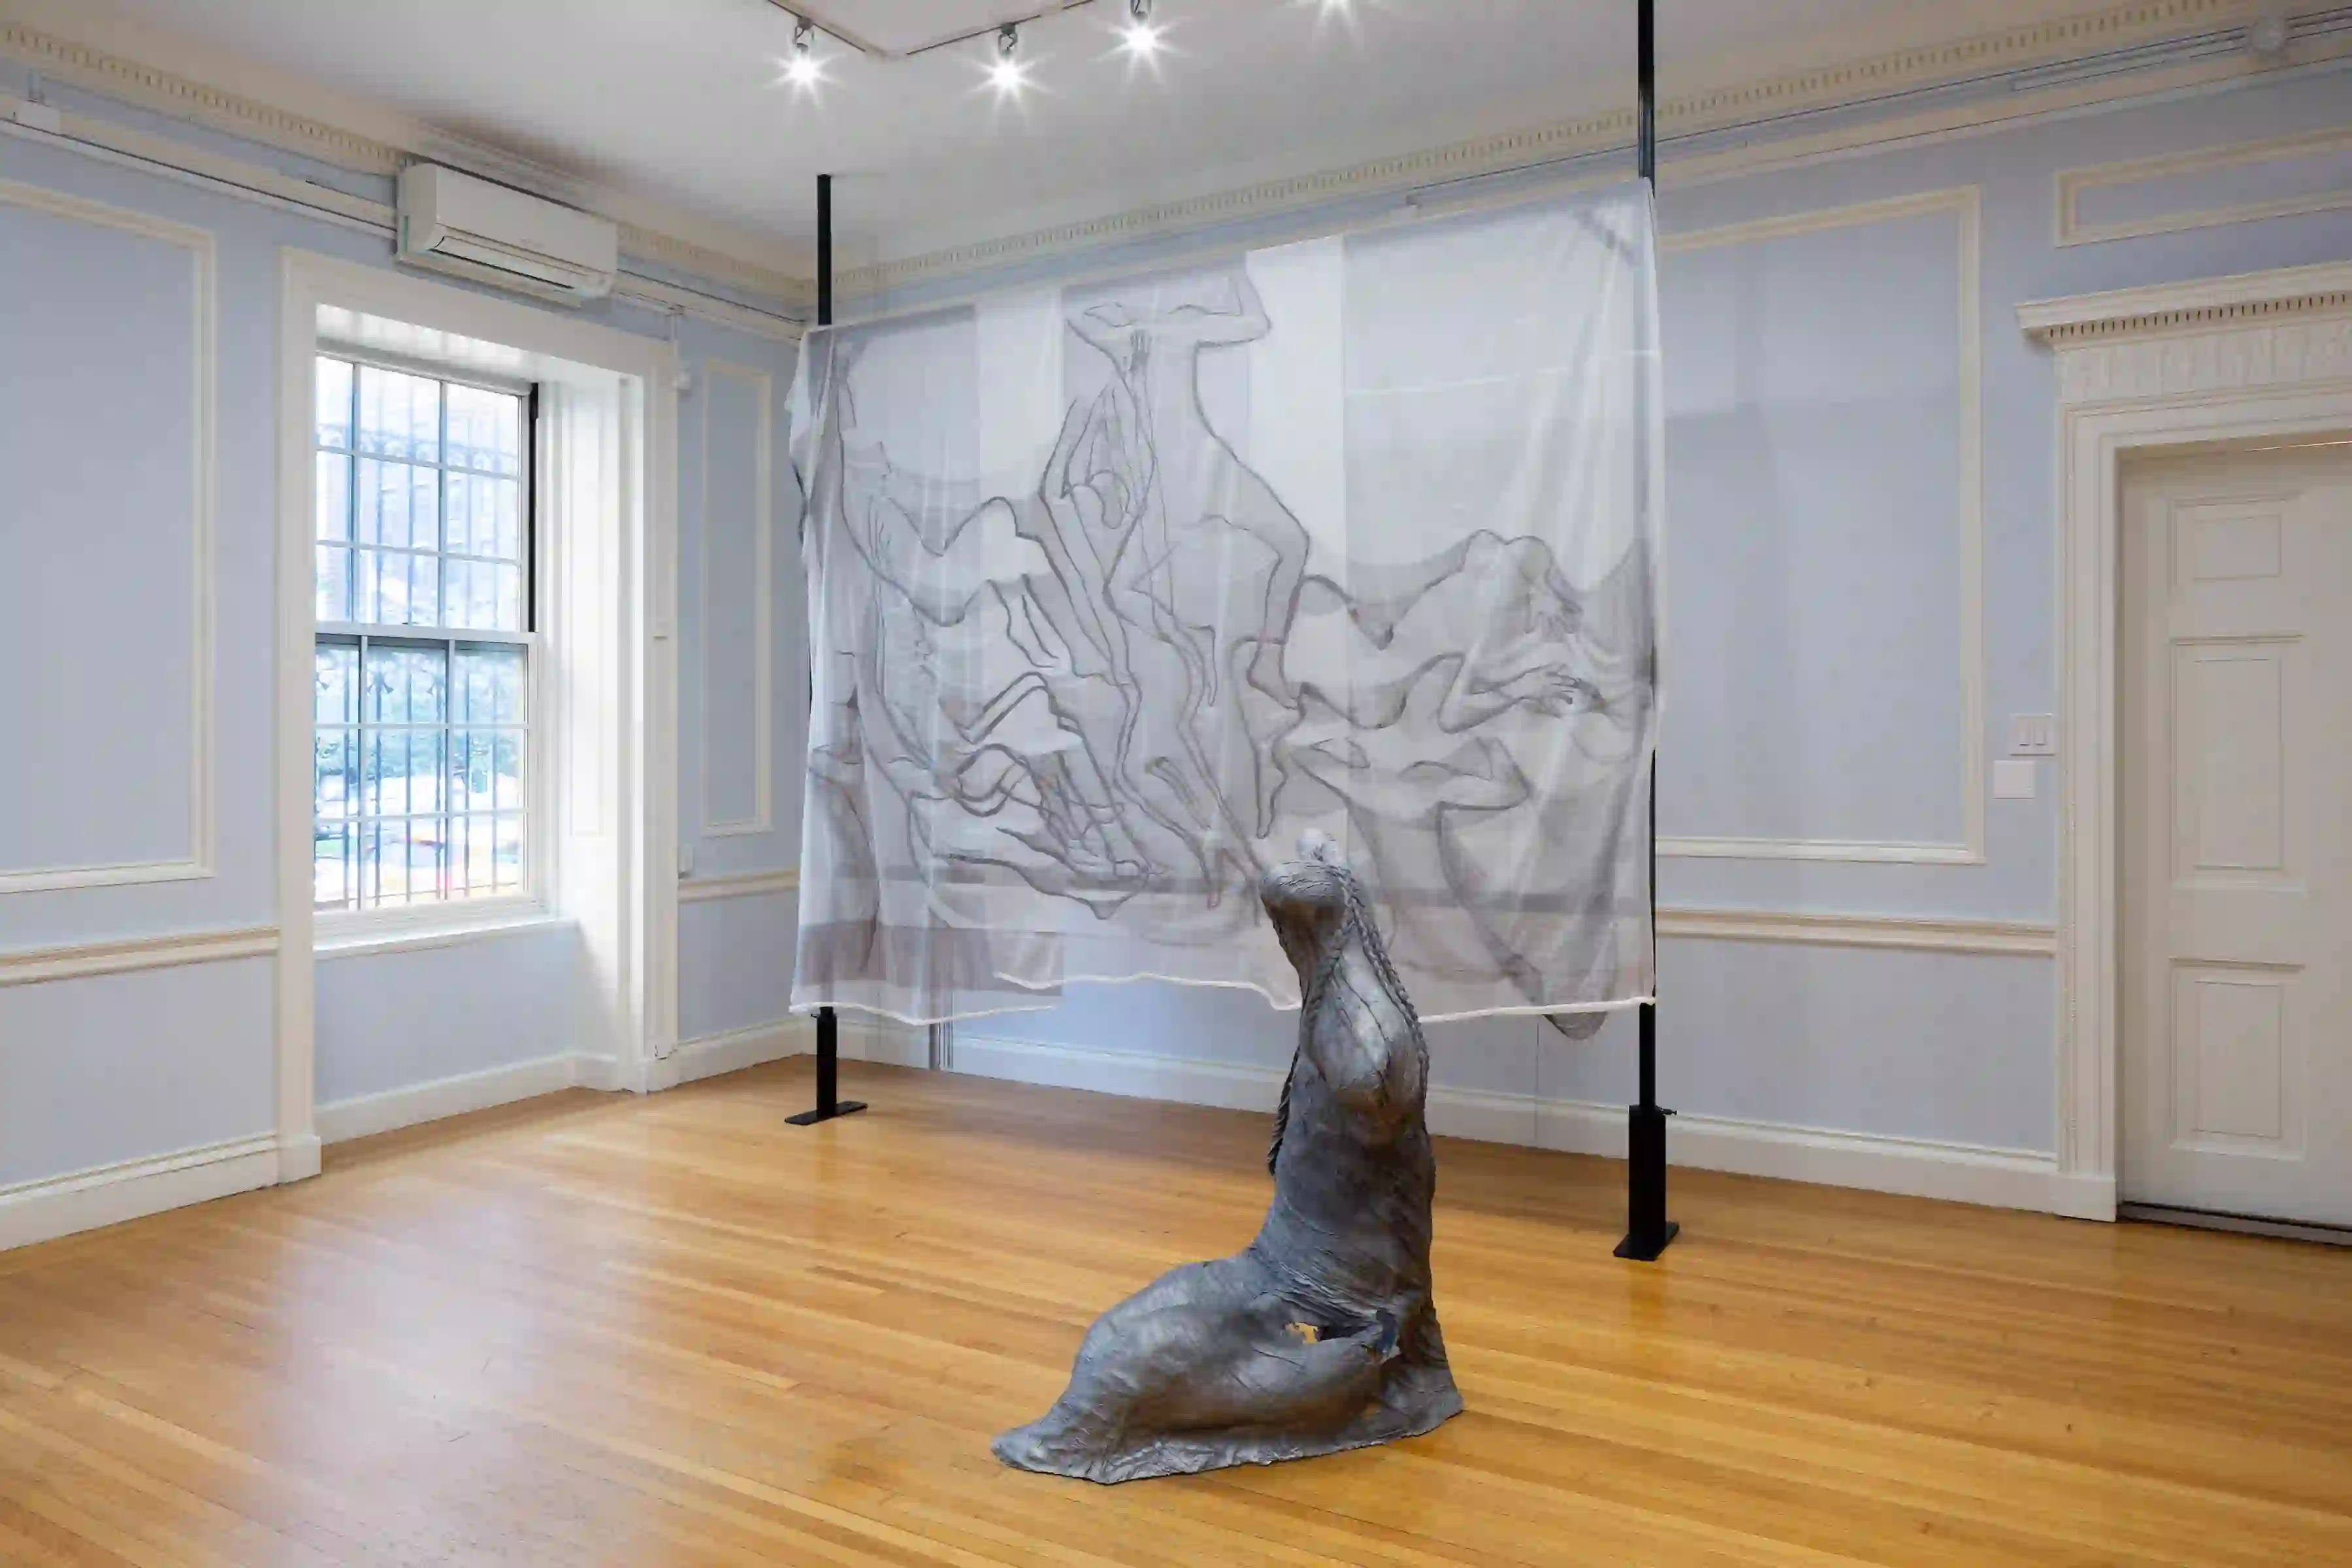 Installation view of the exhibition Margherita Raso: Vizio di Forma at the Italian Cultural Institute in New York. Photos by Alexa Hoyer